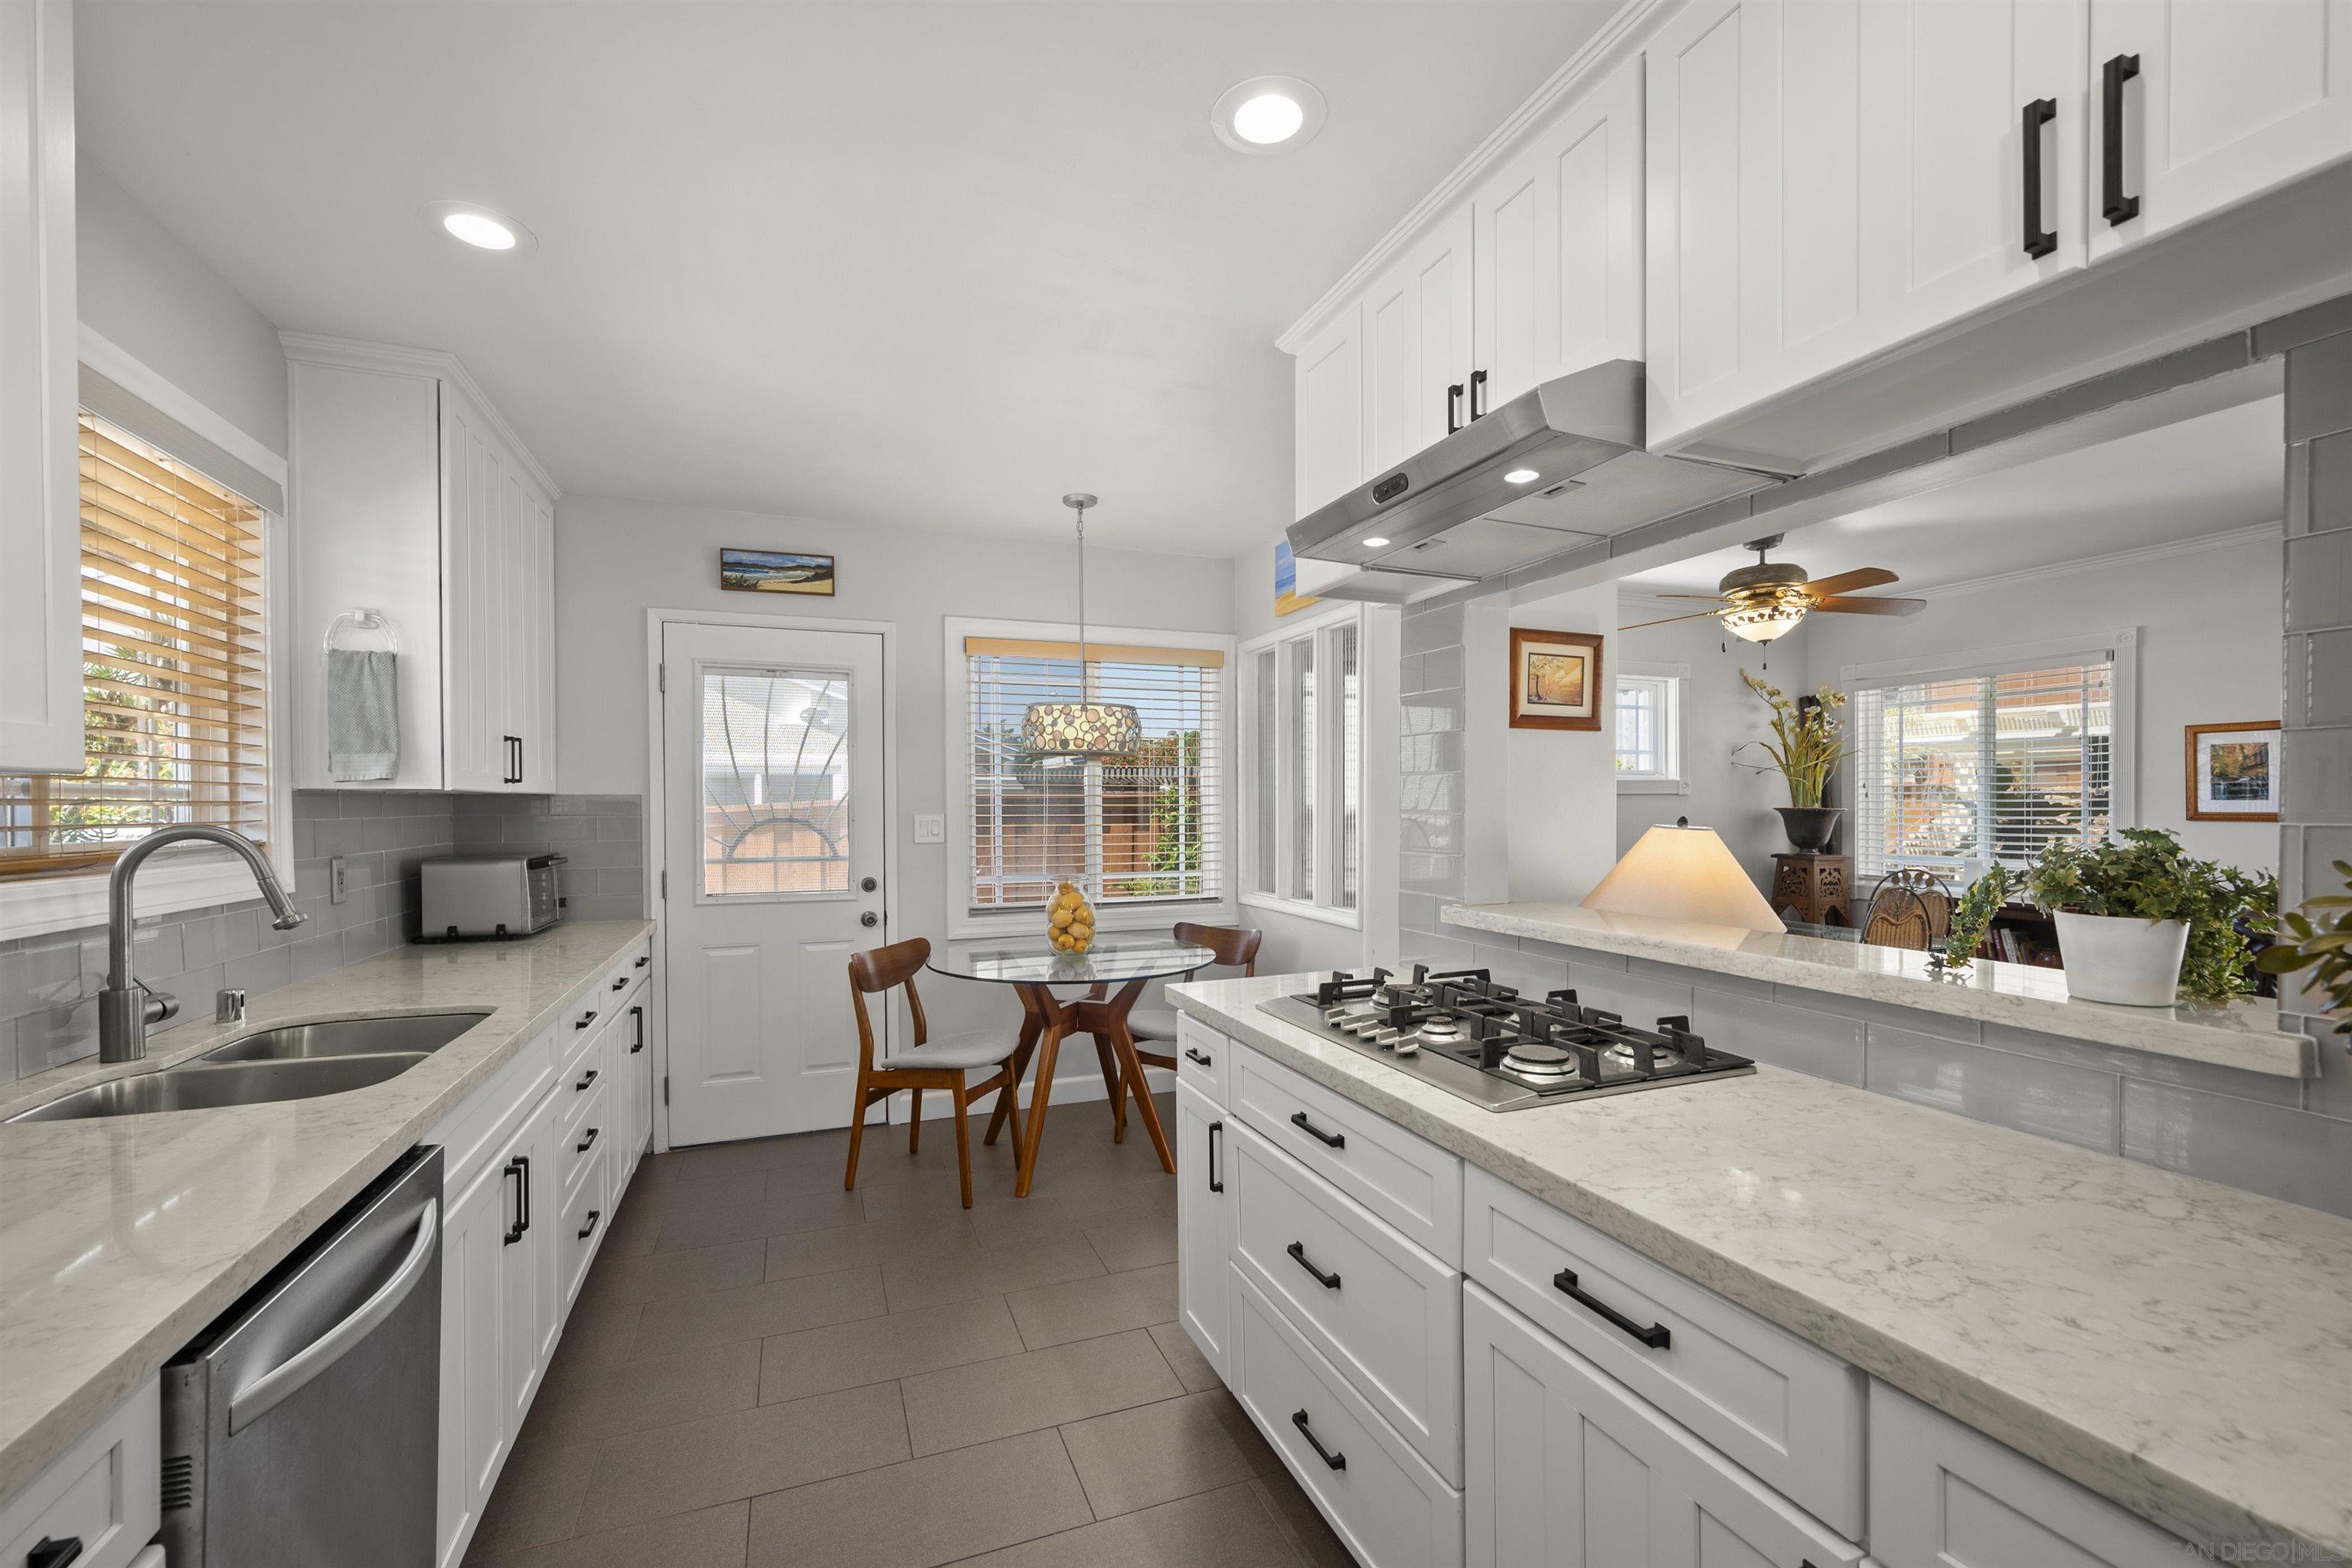 a kitchen with stainless steel appliances kitchen island granite countertop a sink stove and cabinets